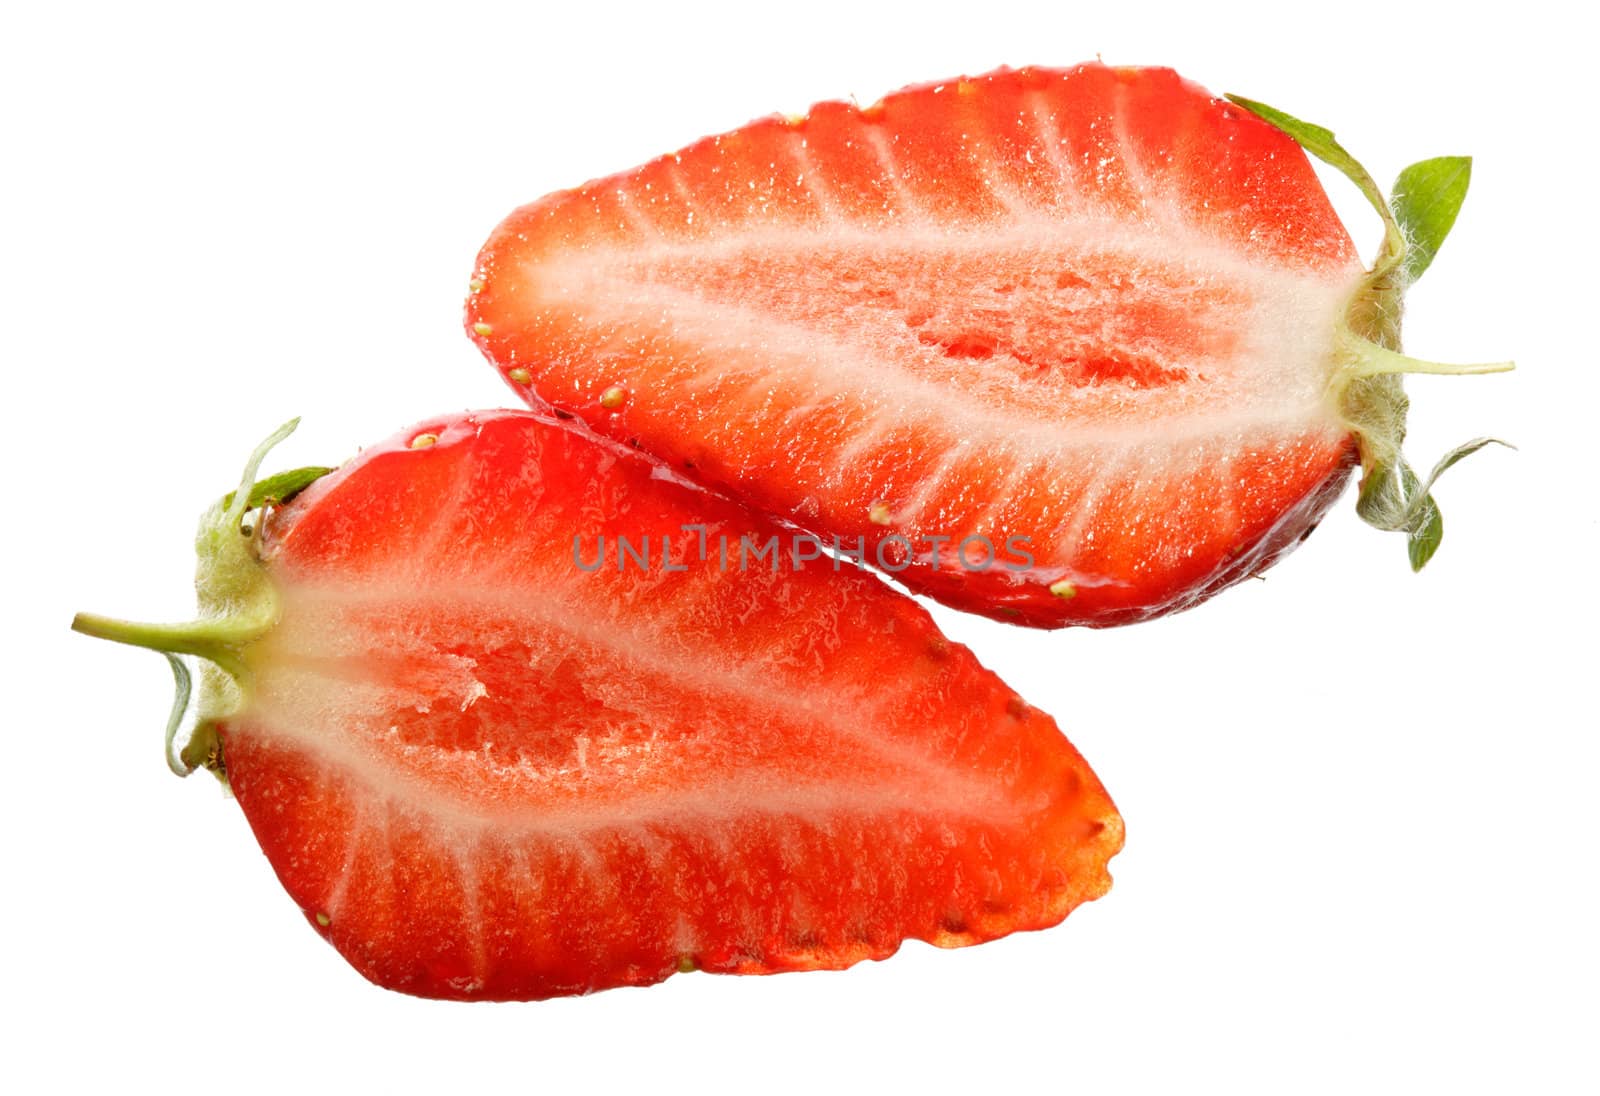 Red strawberry sliced cut into two slices isolated on white